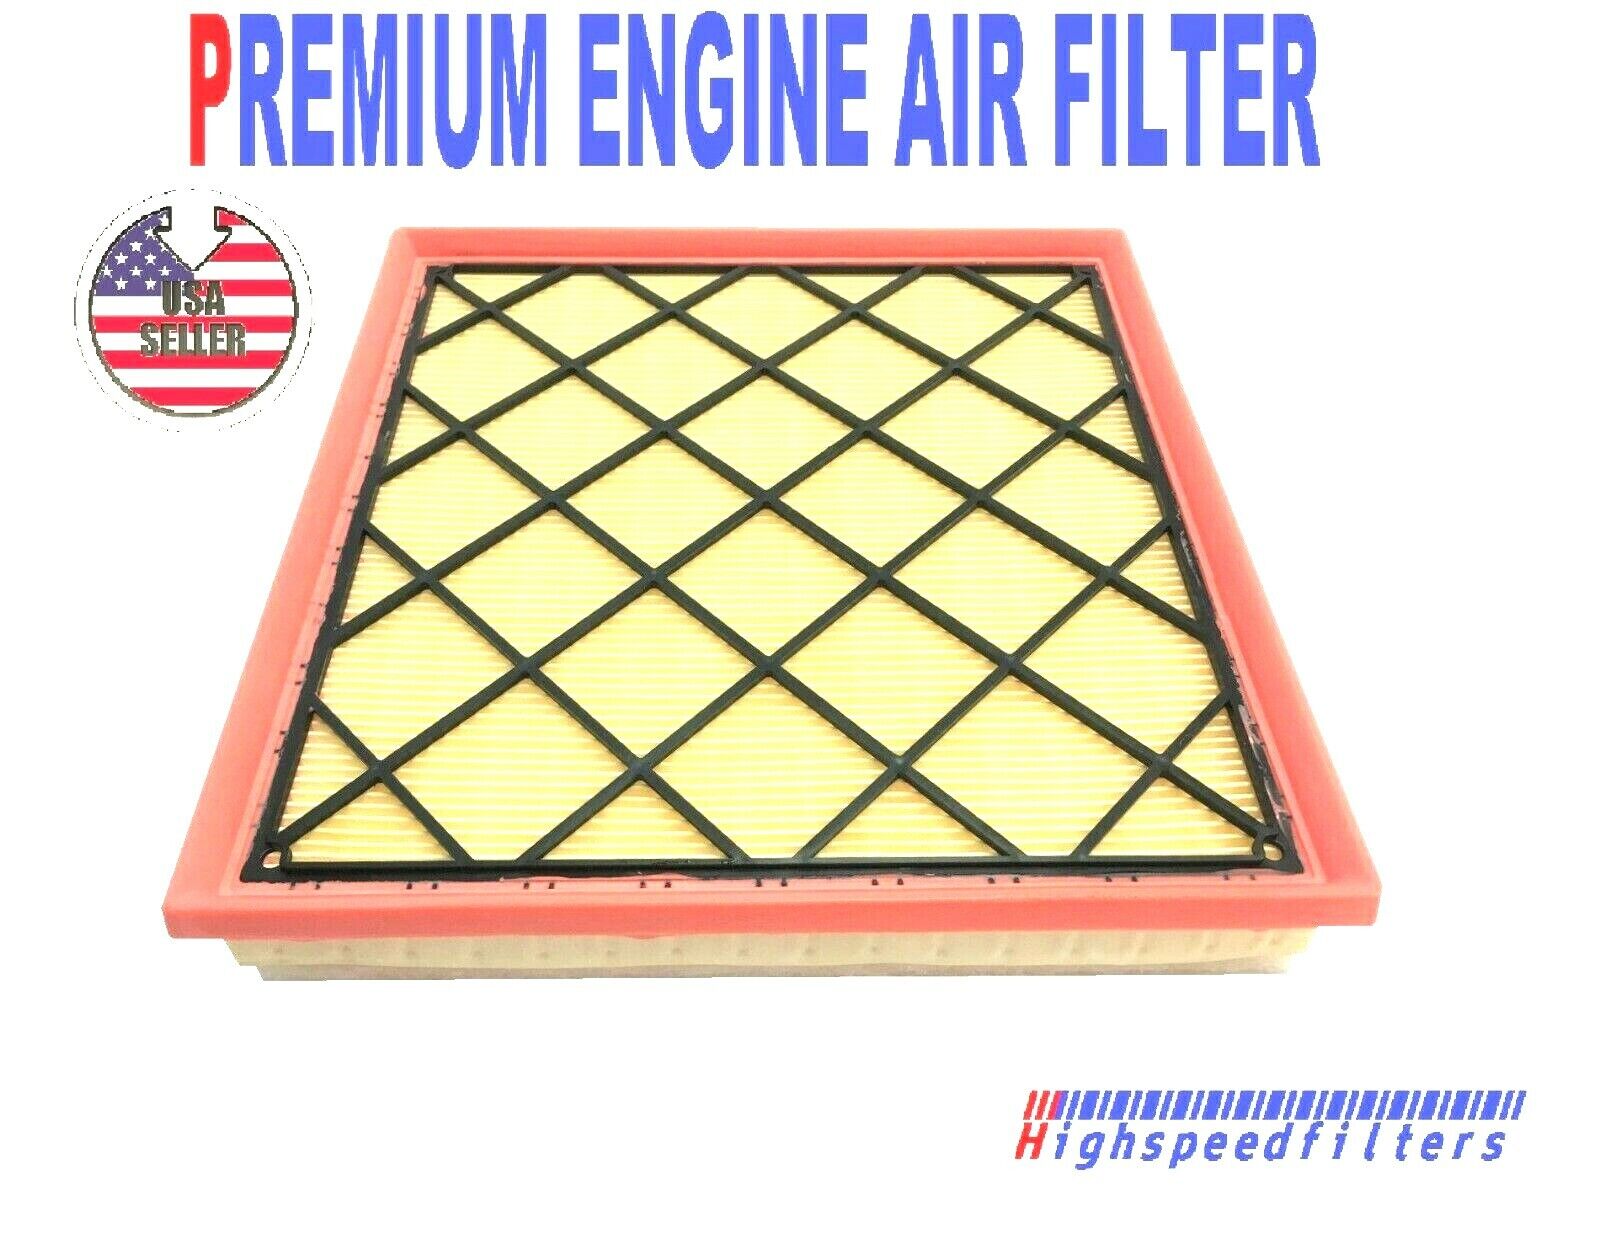 PREMIUM Engine Air Filter AF6152 for 2012 - 2017 BUICK VERANO 2.4L engine only